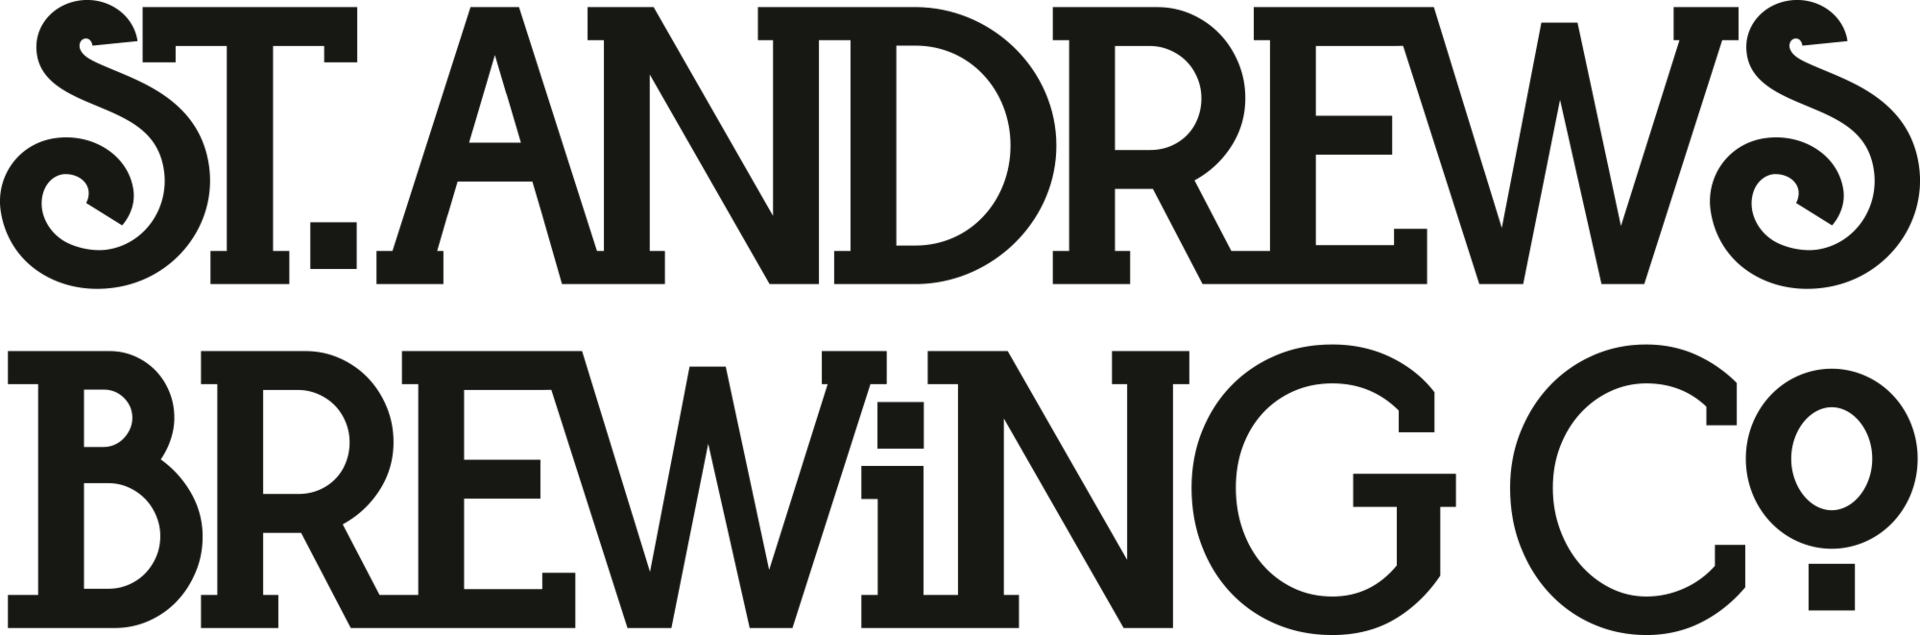 St Andrews Brewing Company